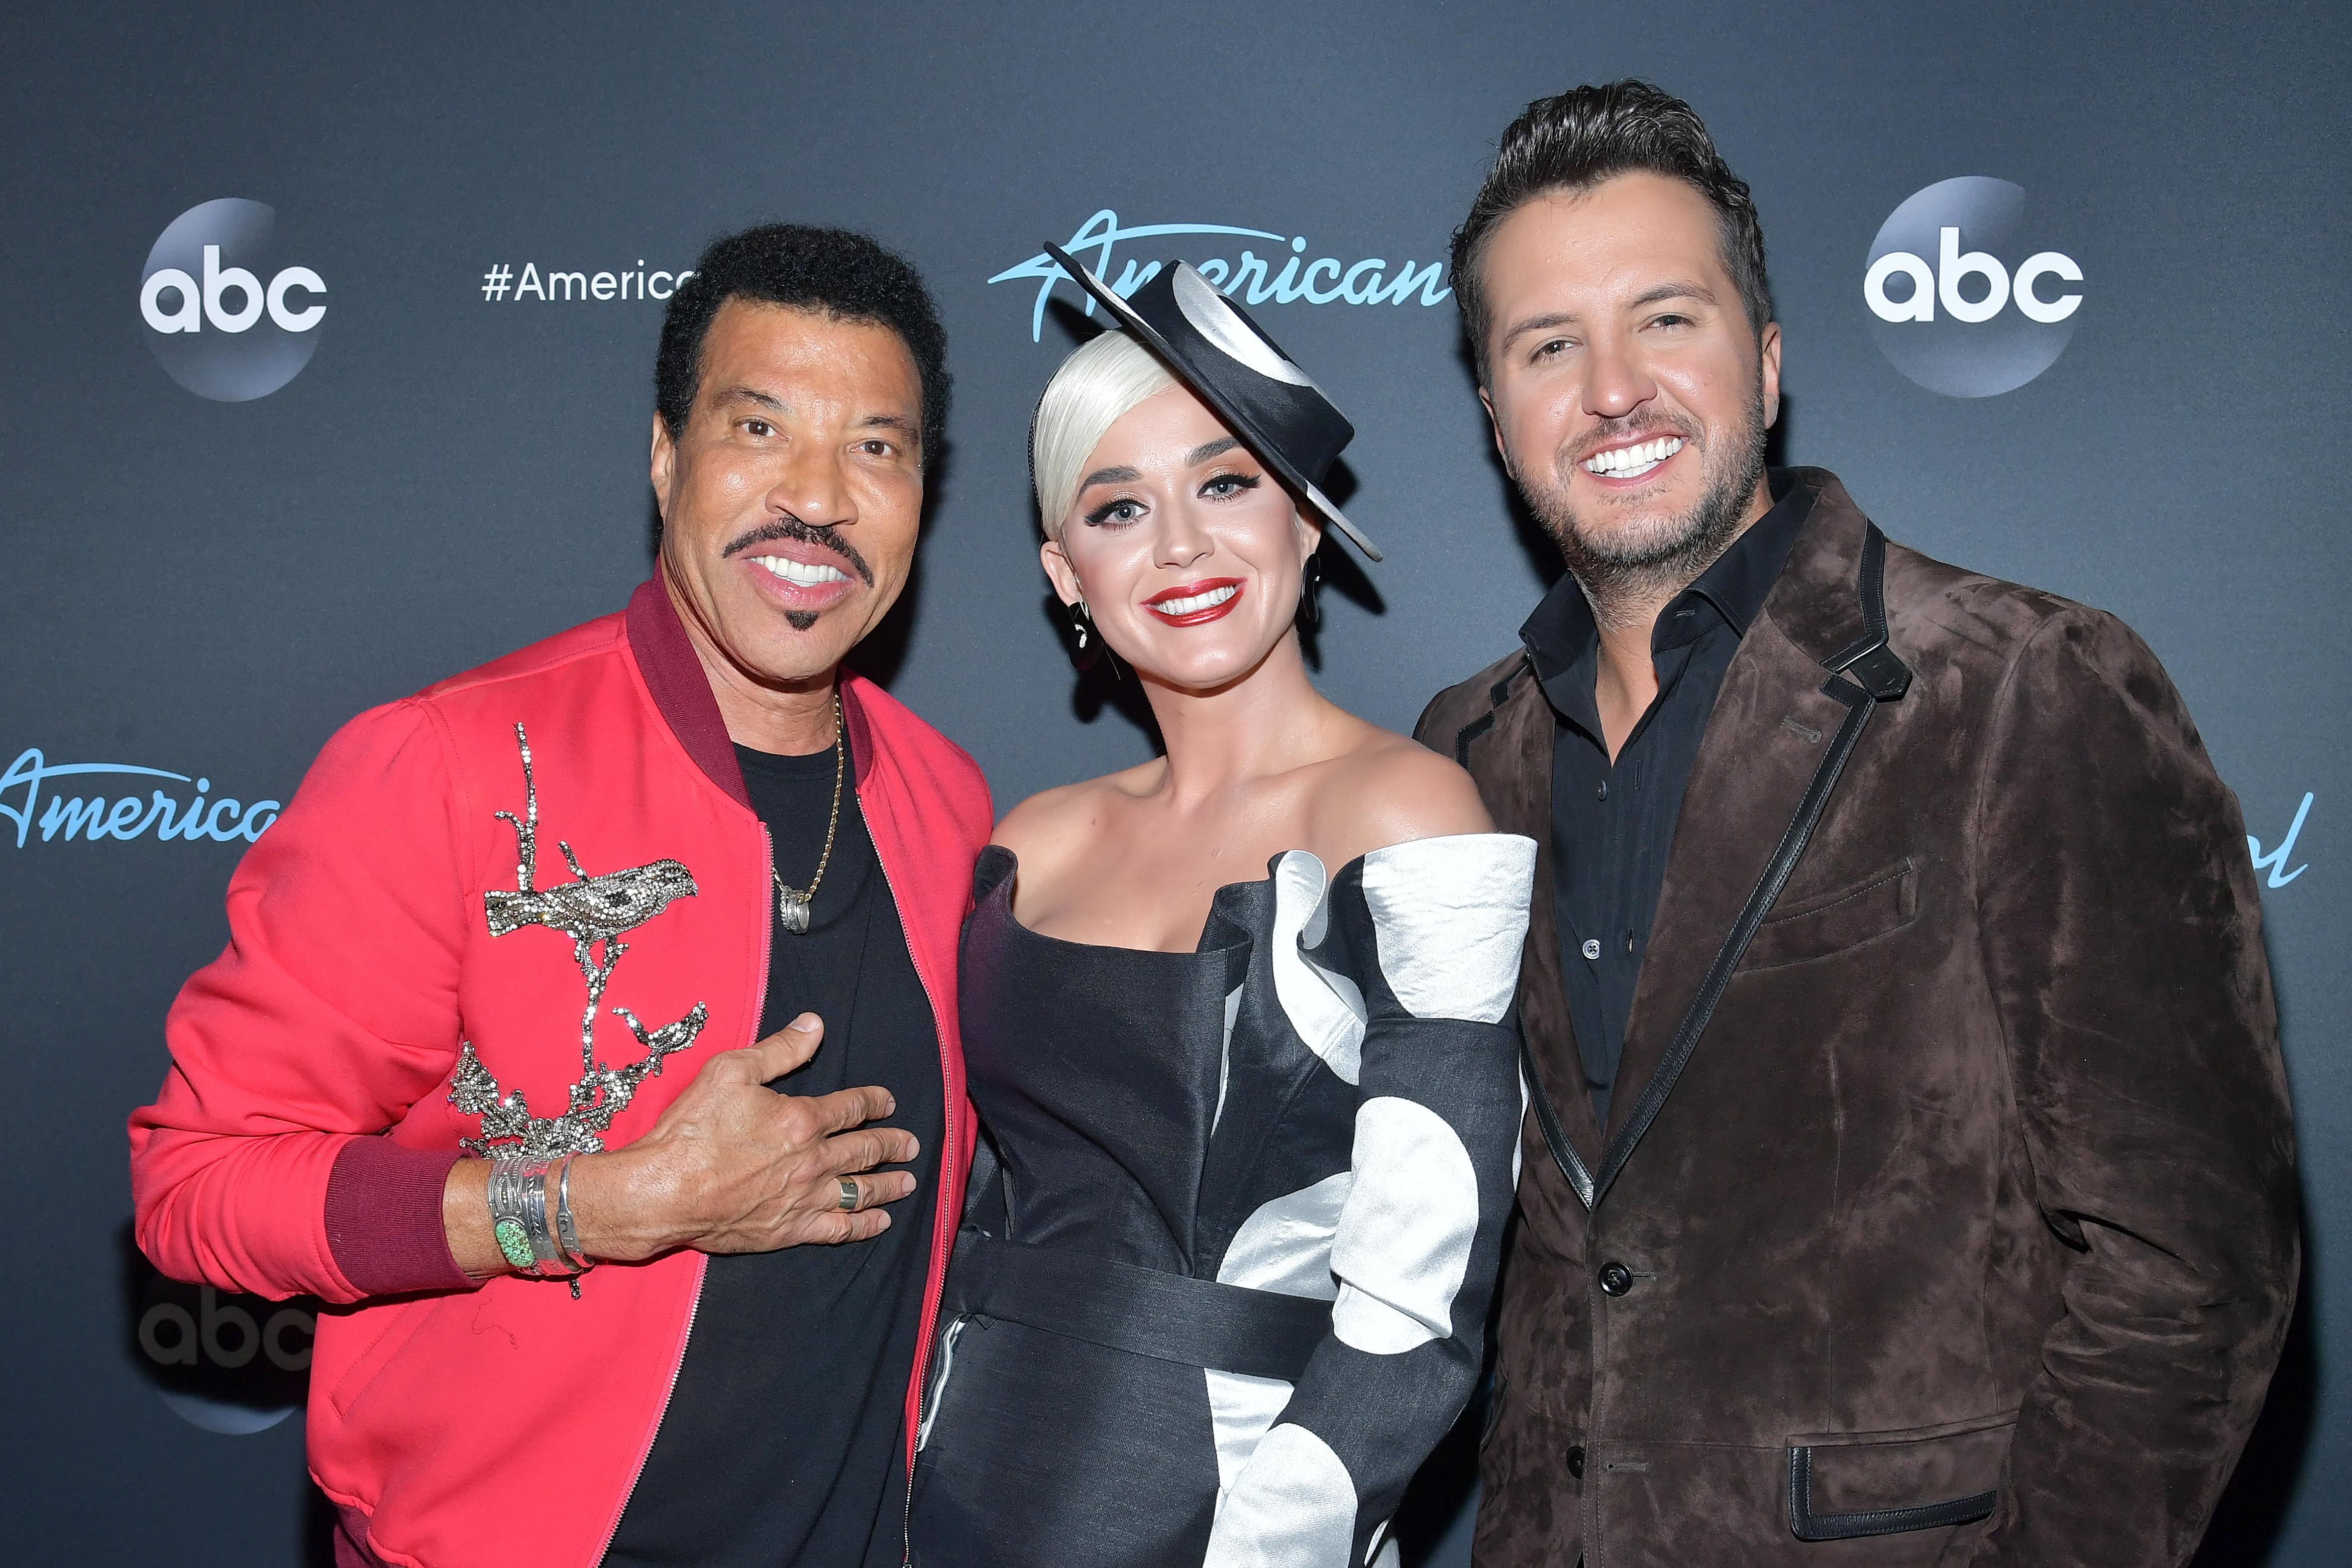 Katy Perry Won’t Be Inviting Fellow ‘American Idol’ Judges Luke Bryan and Lionel Richie to Wedding